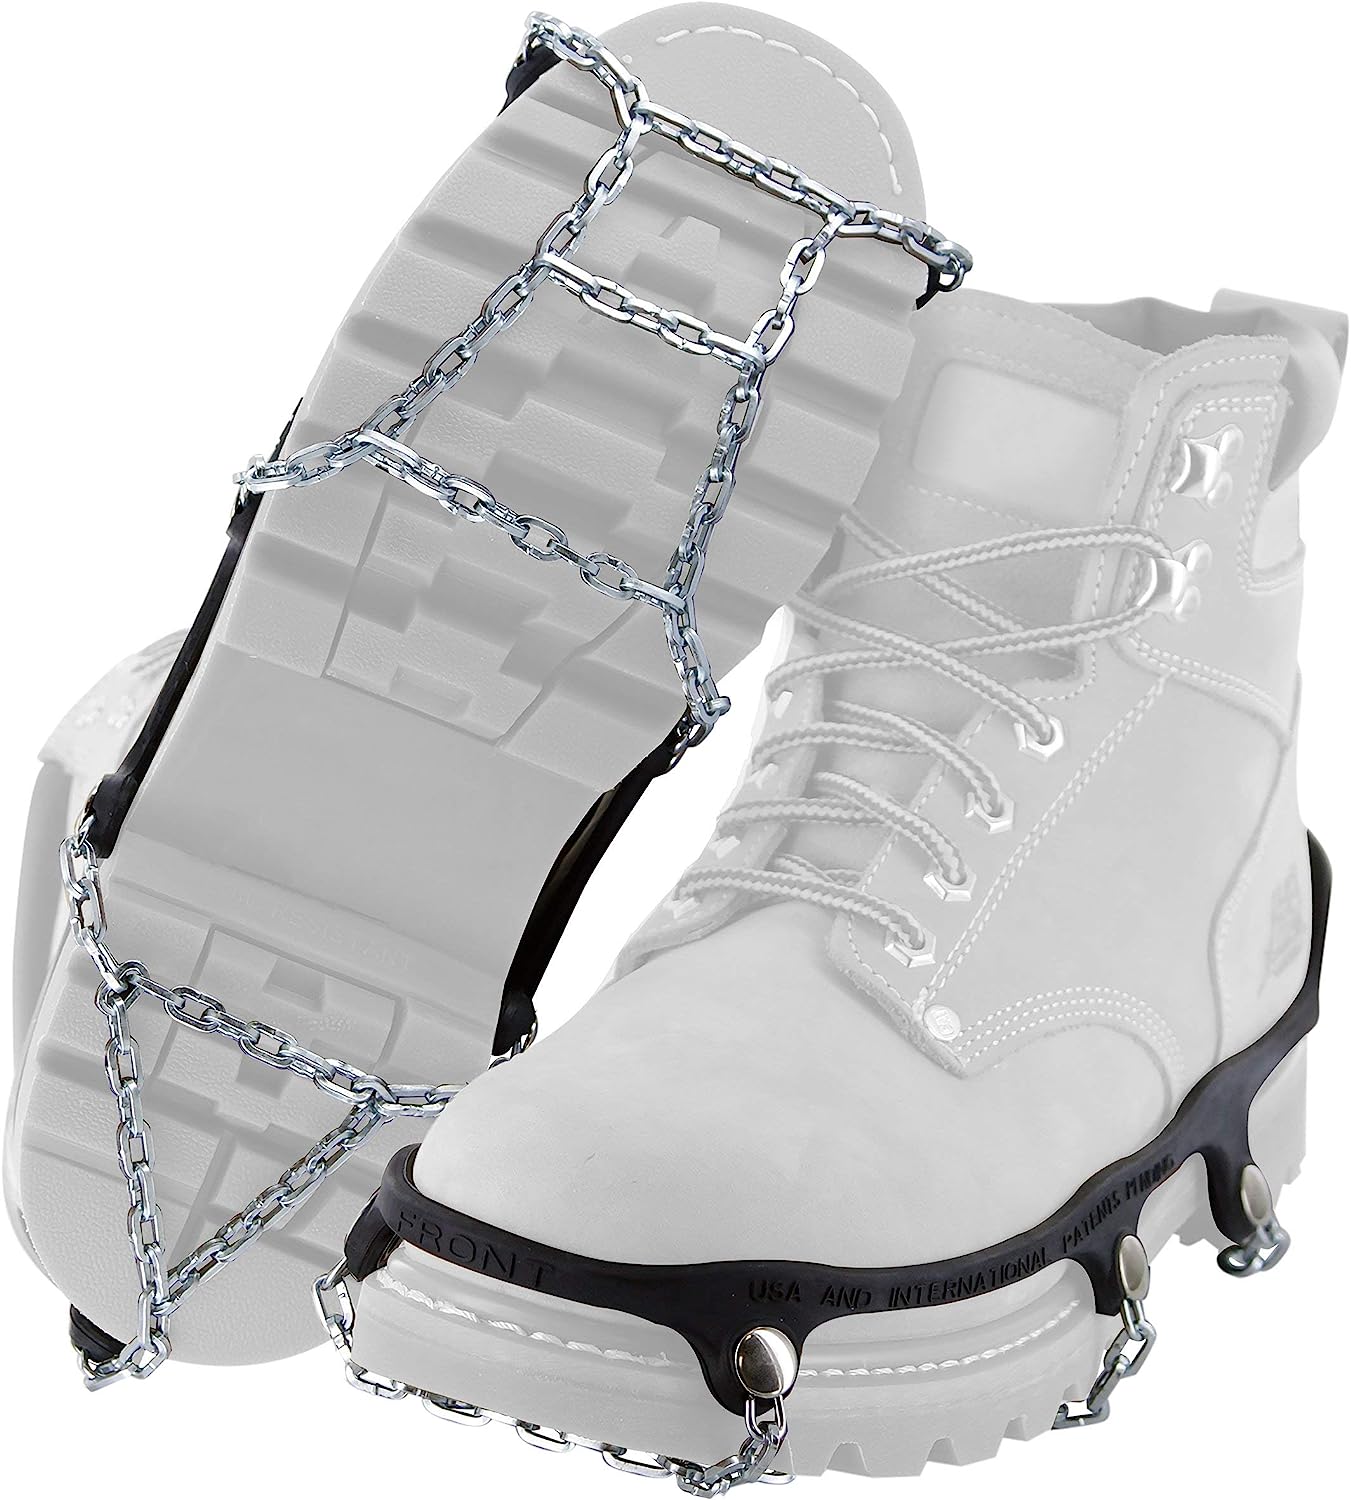 Yaktrax Traction Chains for Walking on Ice and Snow (1 Pair)